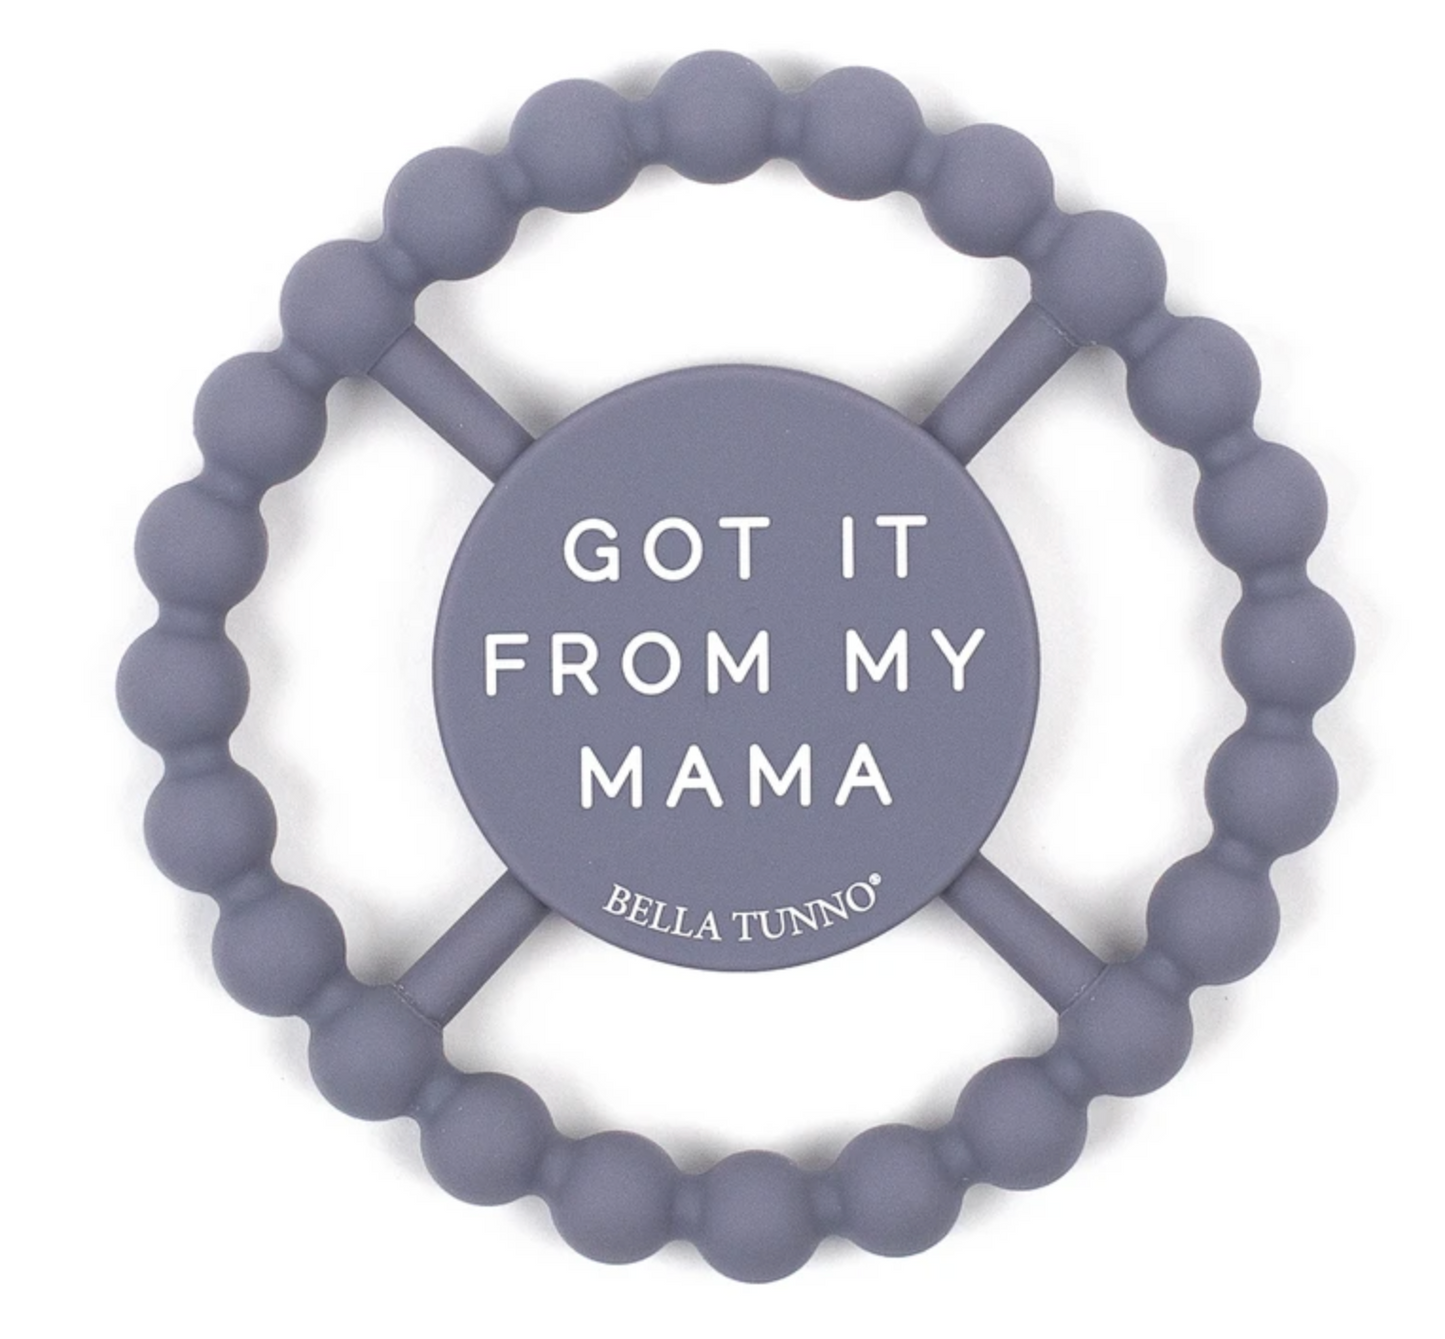 Bella Tunno "Got It From My Mama" Happy Teether